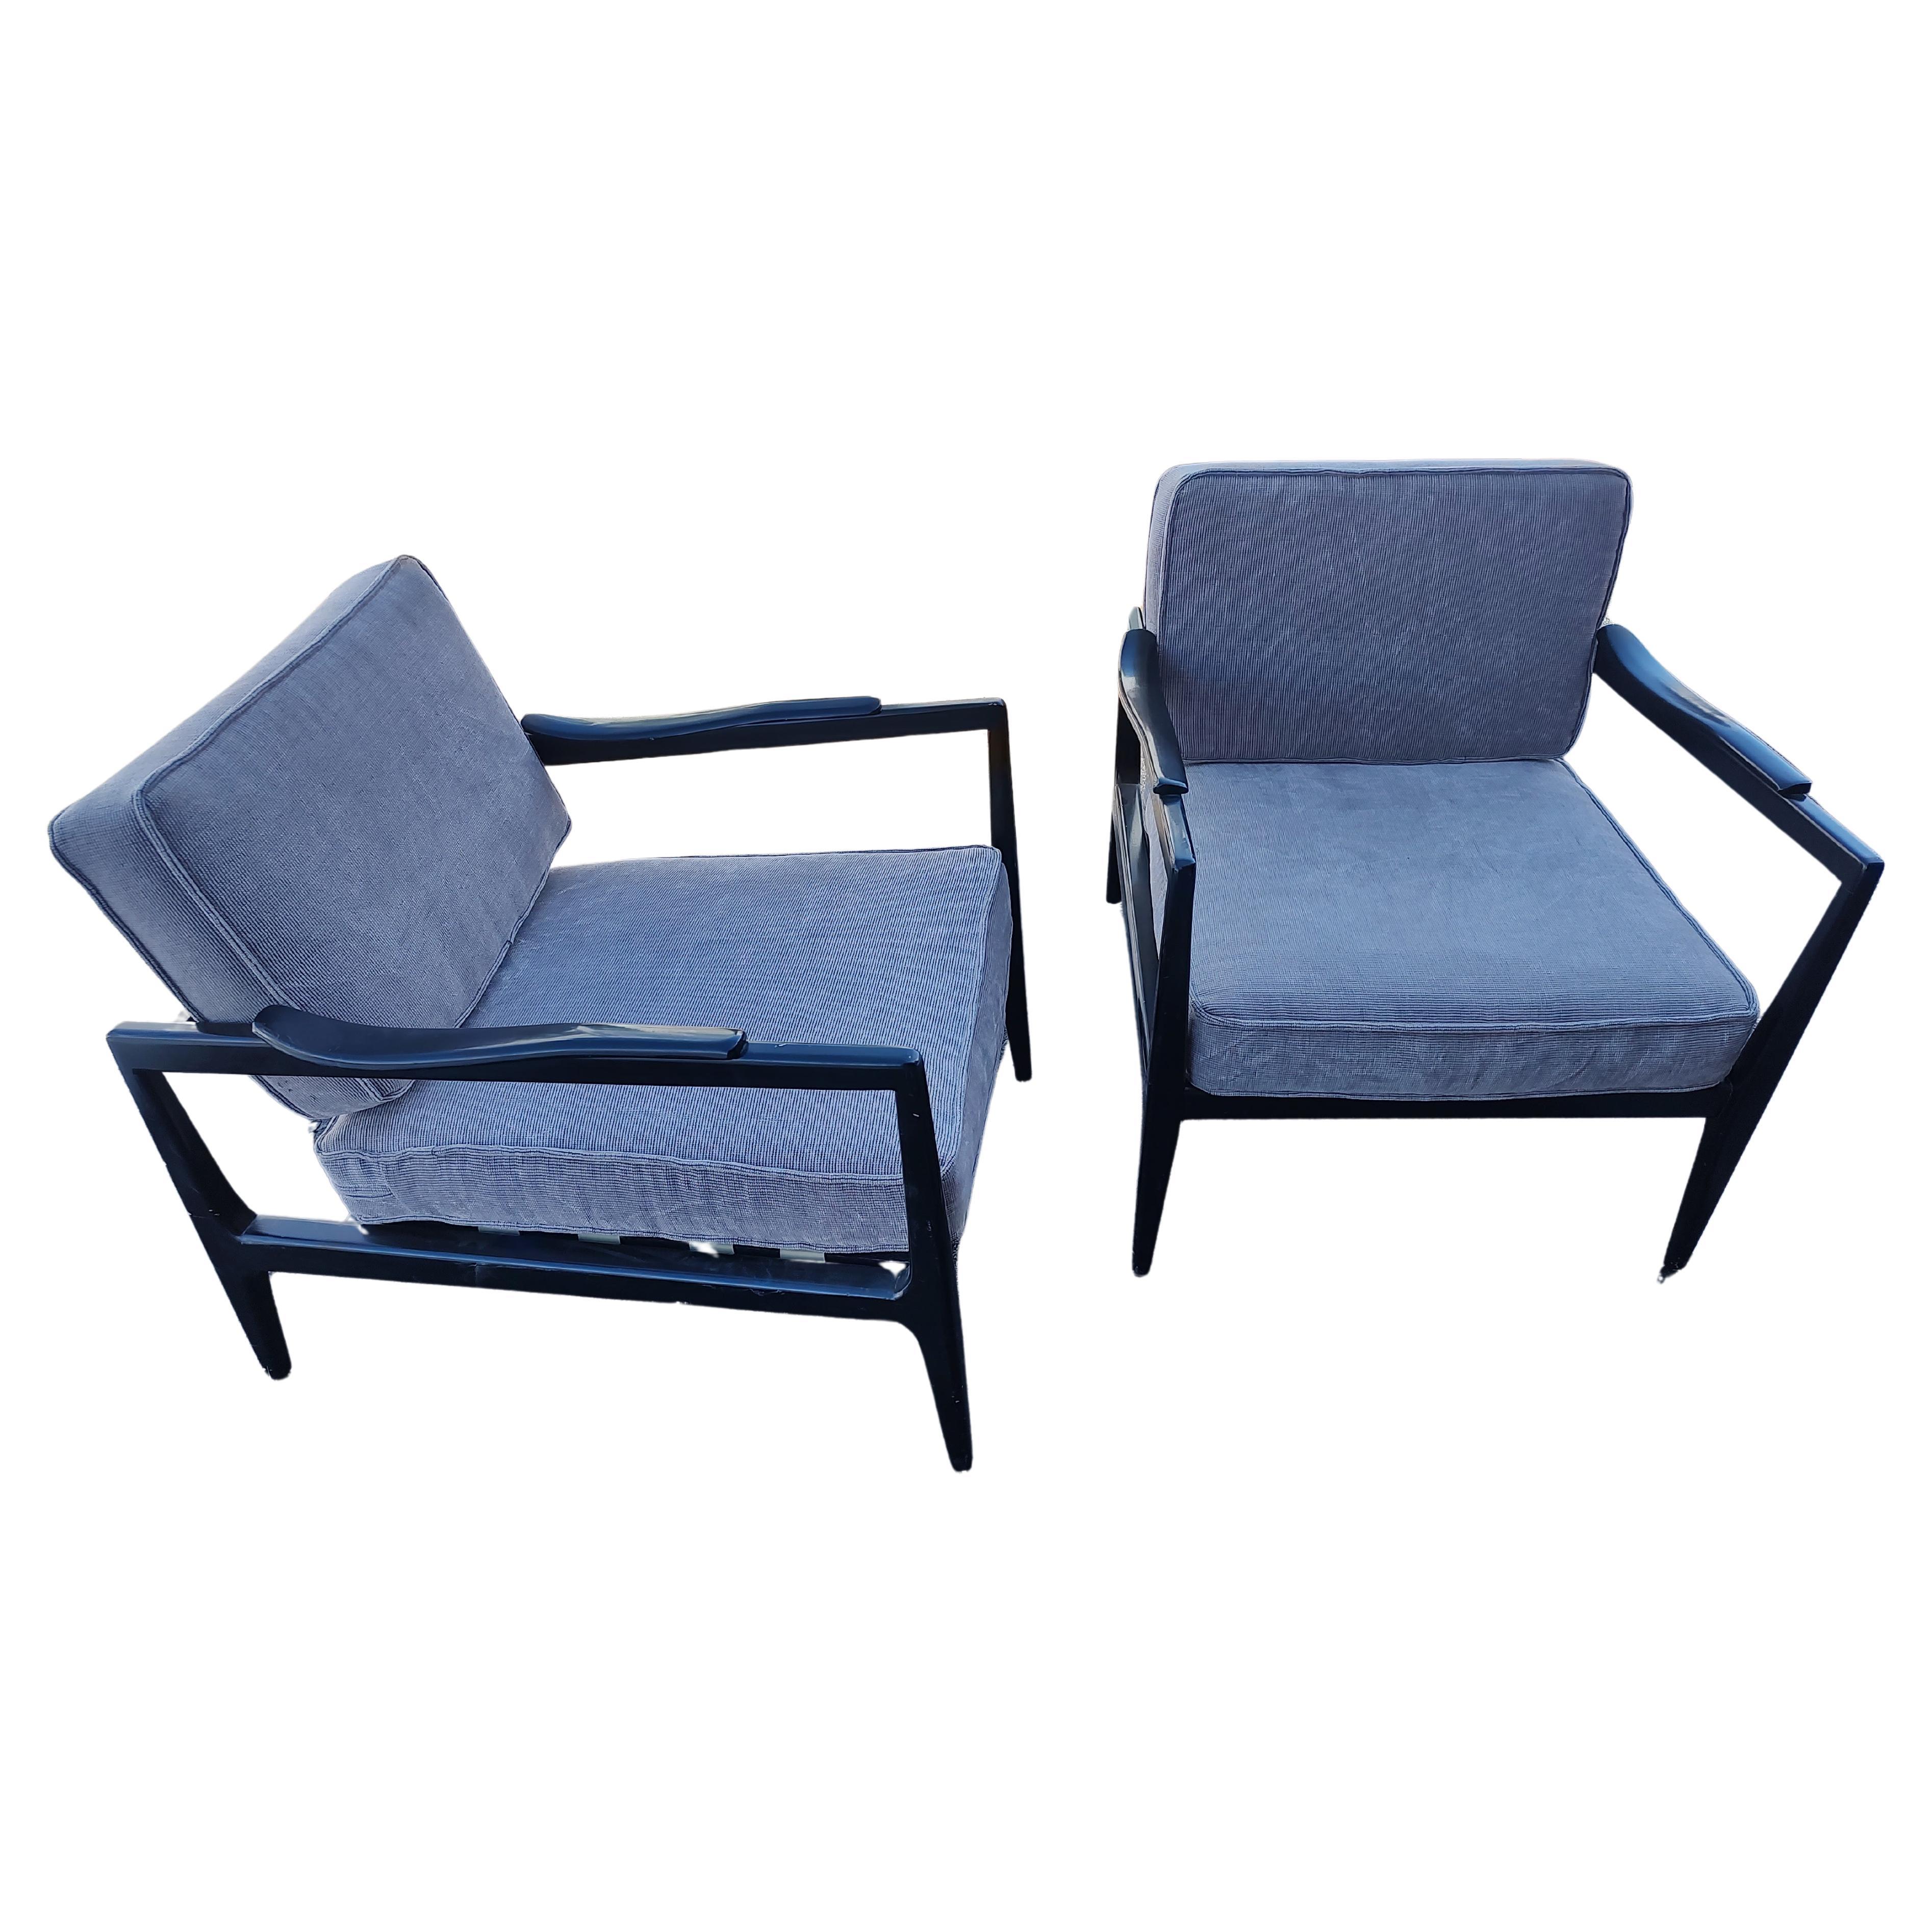 Fabric Pair of Mid Century Modern Sculptural Lounge Chairs by Edmond Spence For Sale